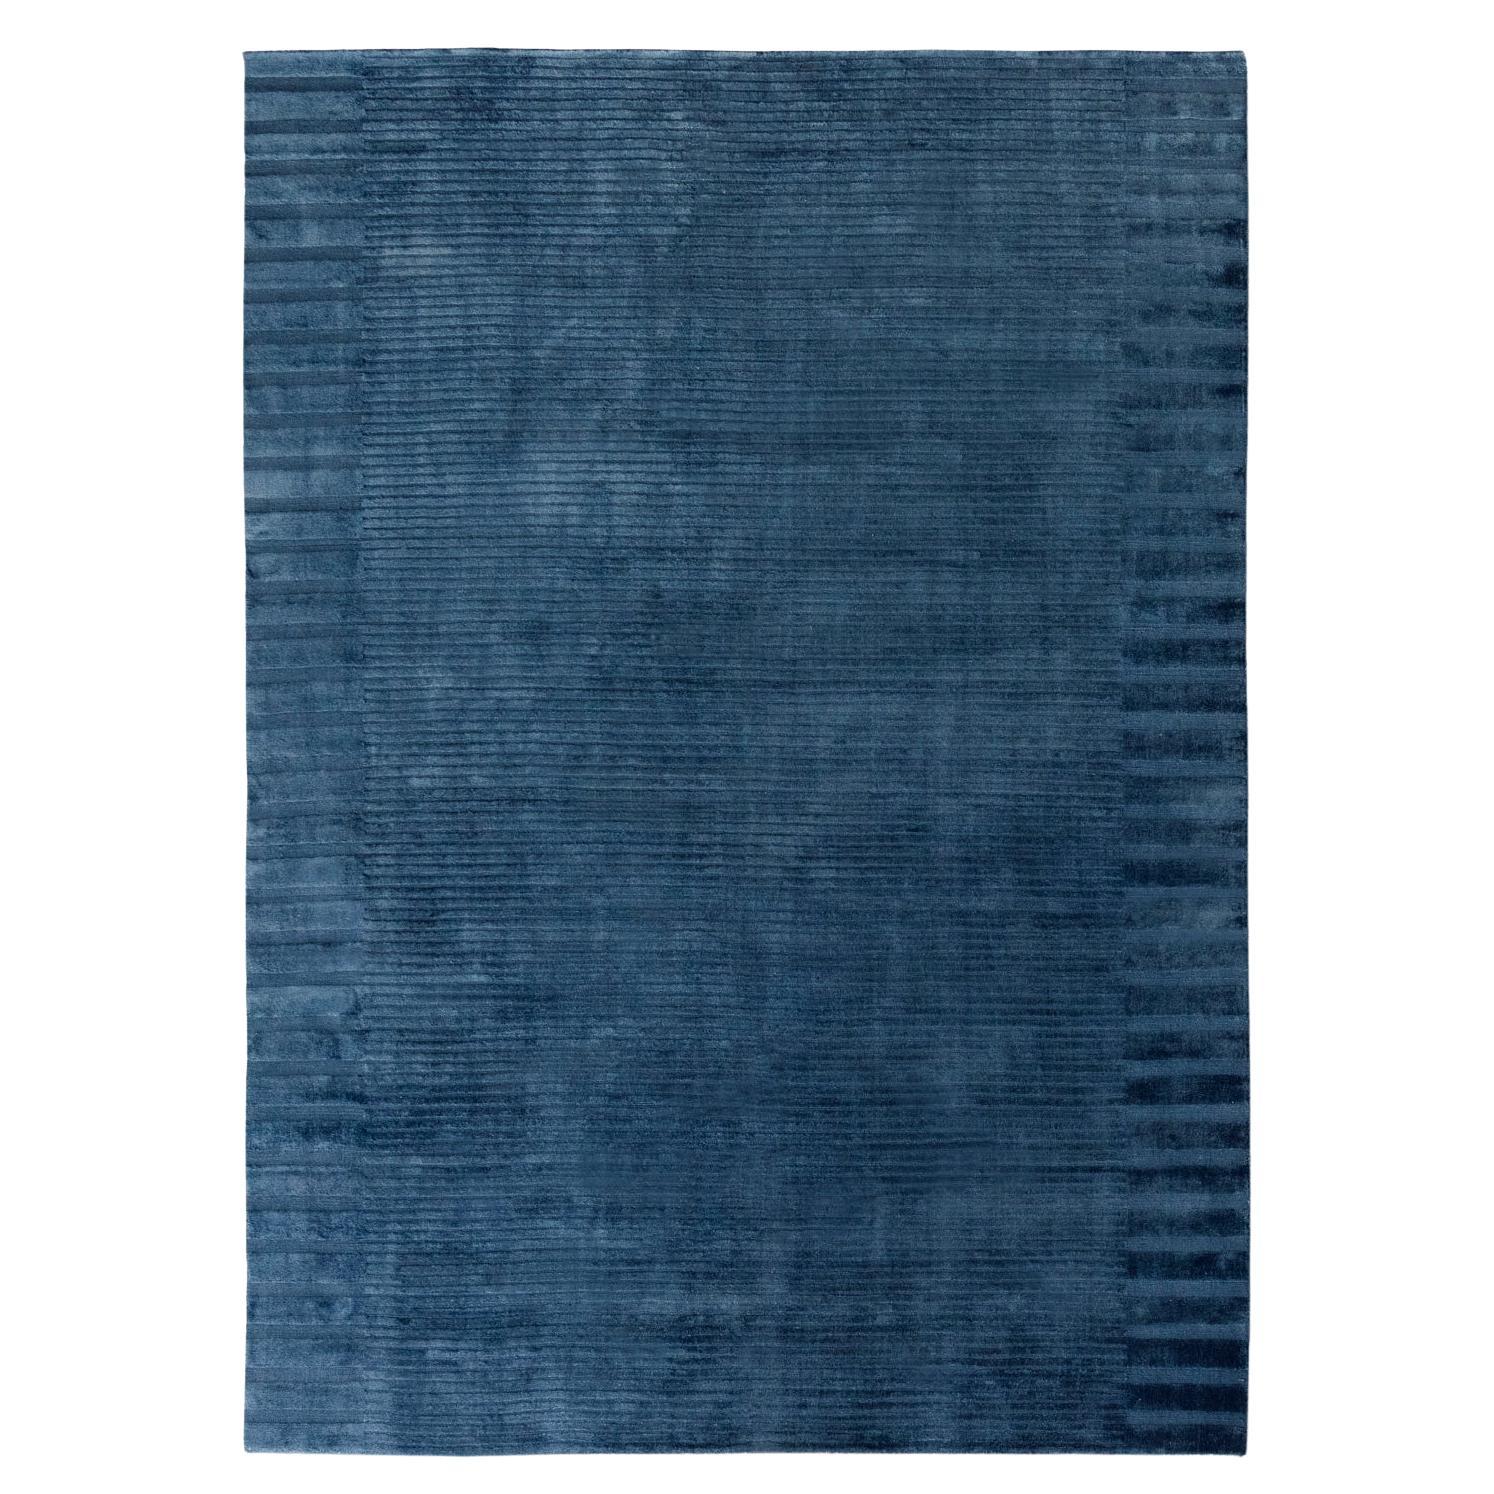 21st Cent Natural Striped Spring Blue Rug by Deanna Comellini In Stock 250x350cm For Sale